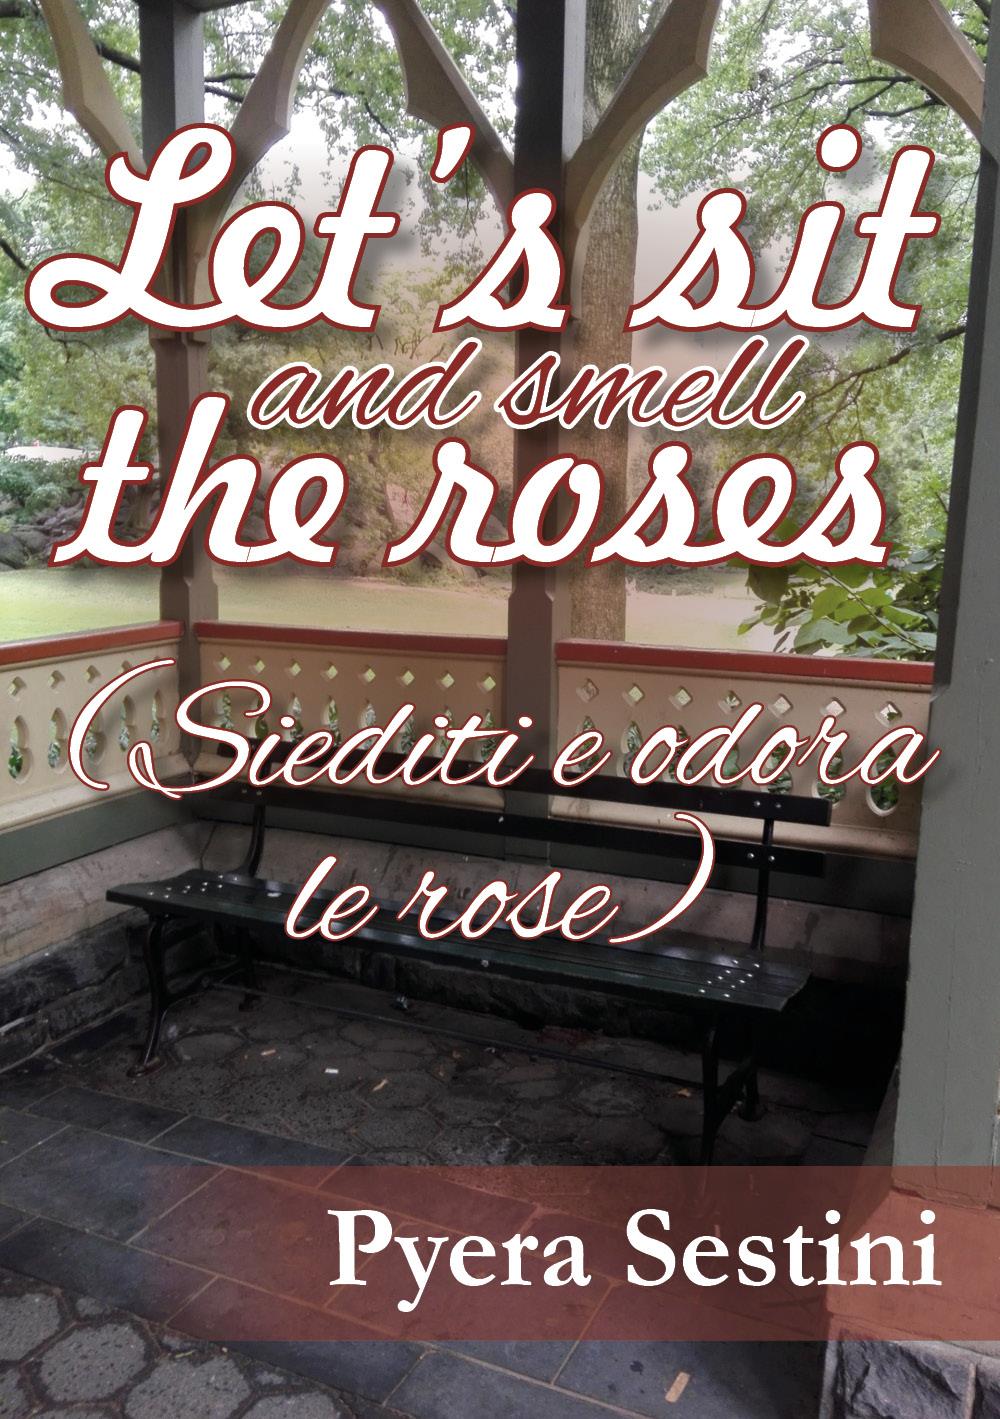 Let's sit and smell the roses